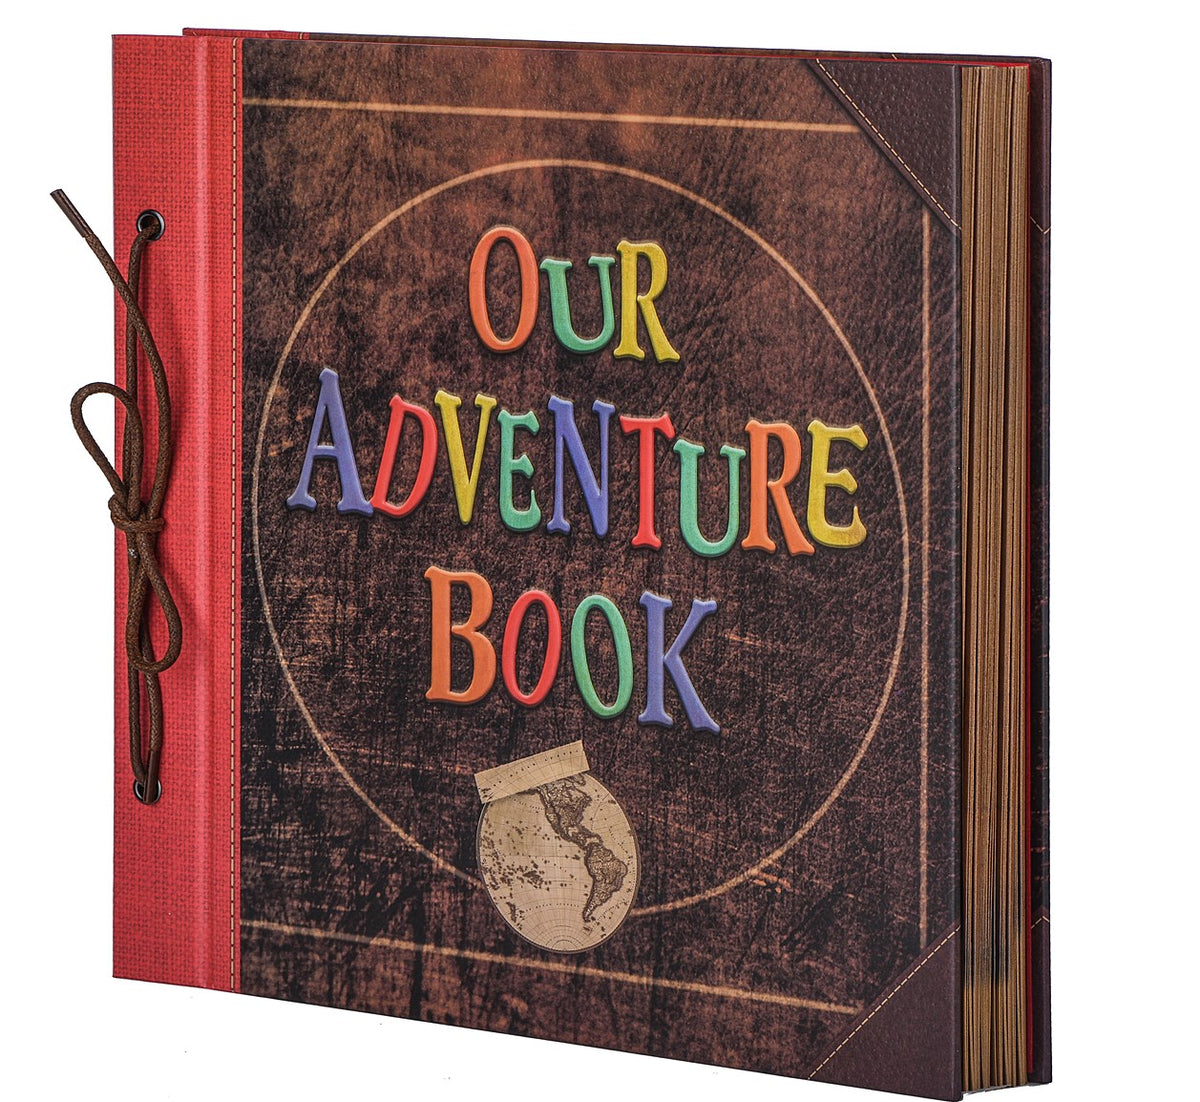 JIMBON Big Adventure Book 12x12 inch Scrapbook Photo Album, 60 Pages, 3D Retro Embossed Letter Hardcover Movie Up Travel Journal Memory Book for